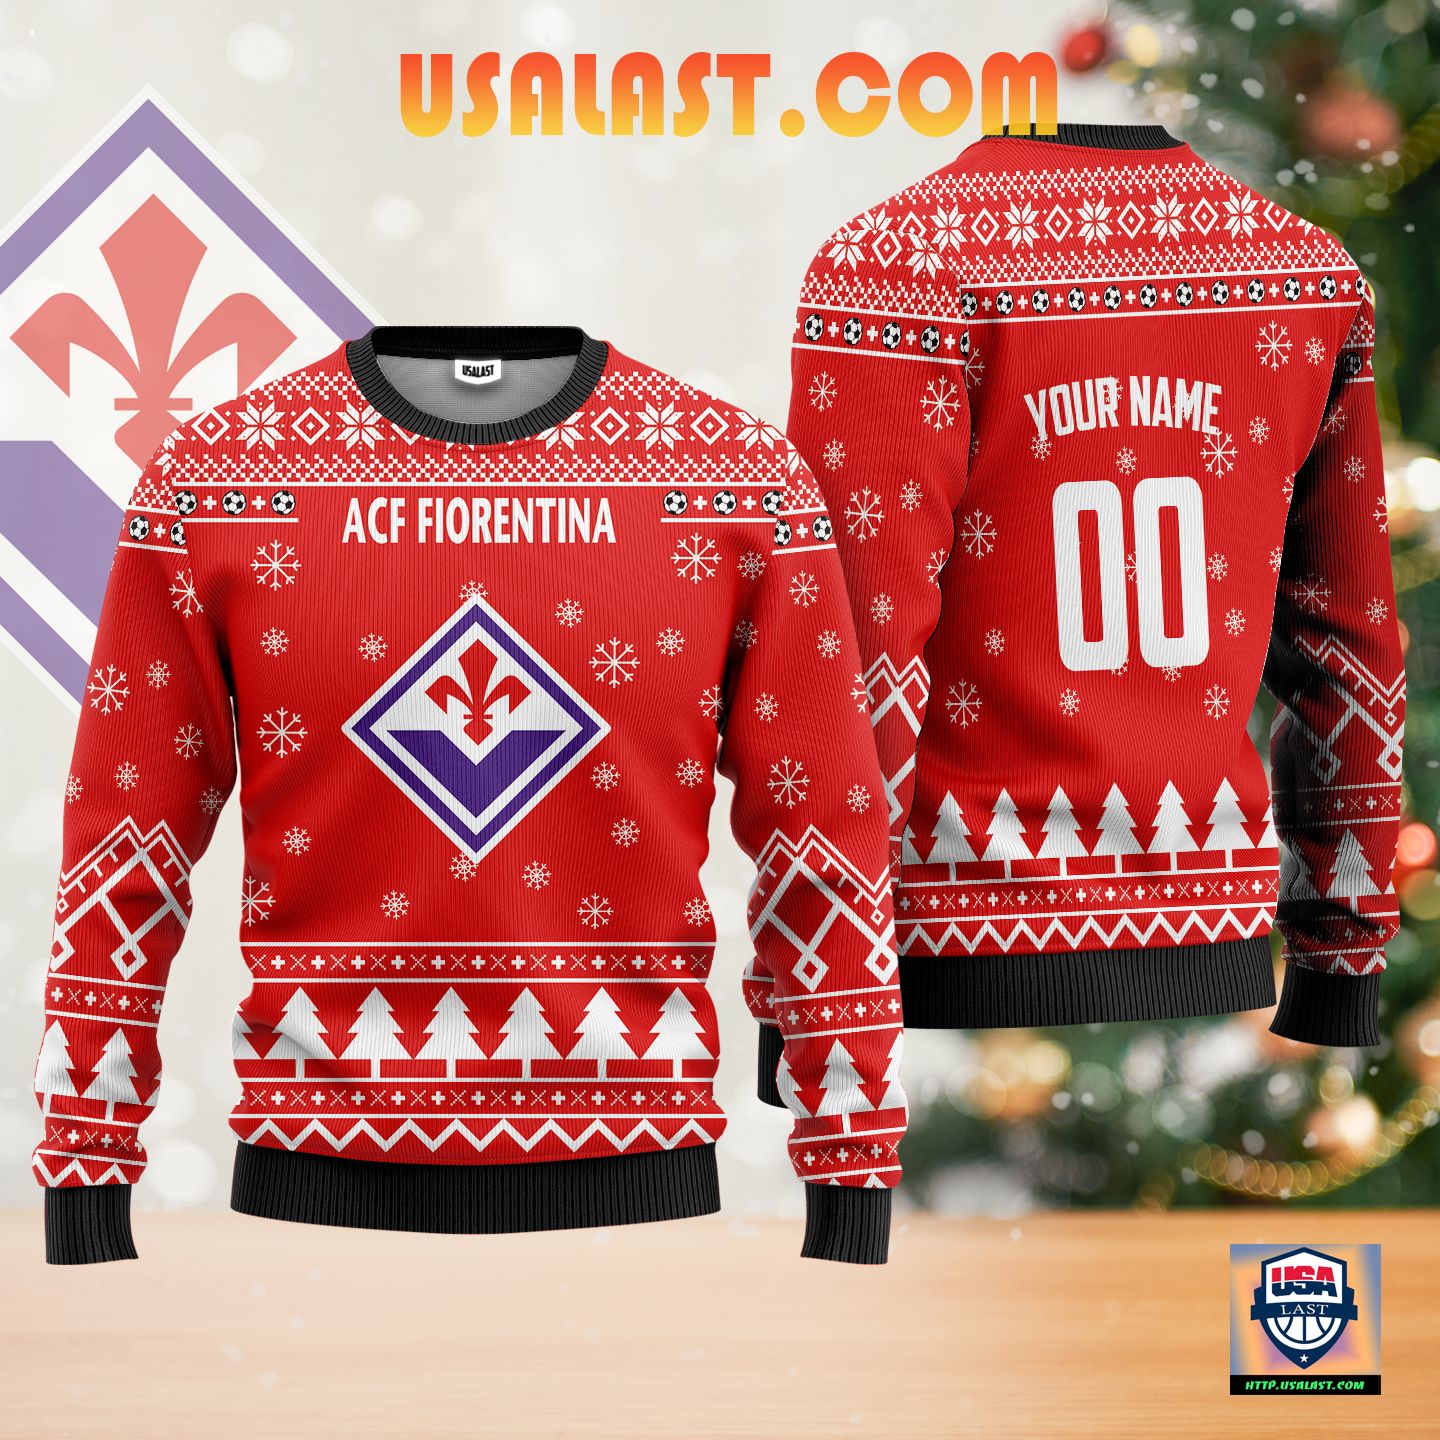 (Big Sale) ACF Fiorentina Personalized Ugly Christmas Sweater Red Version